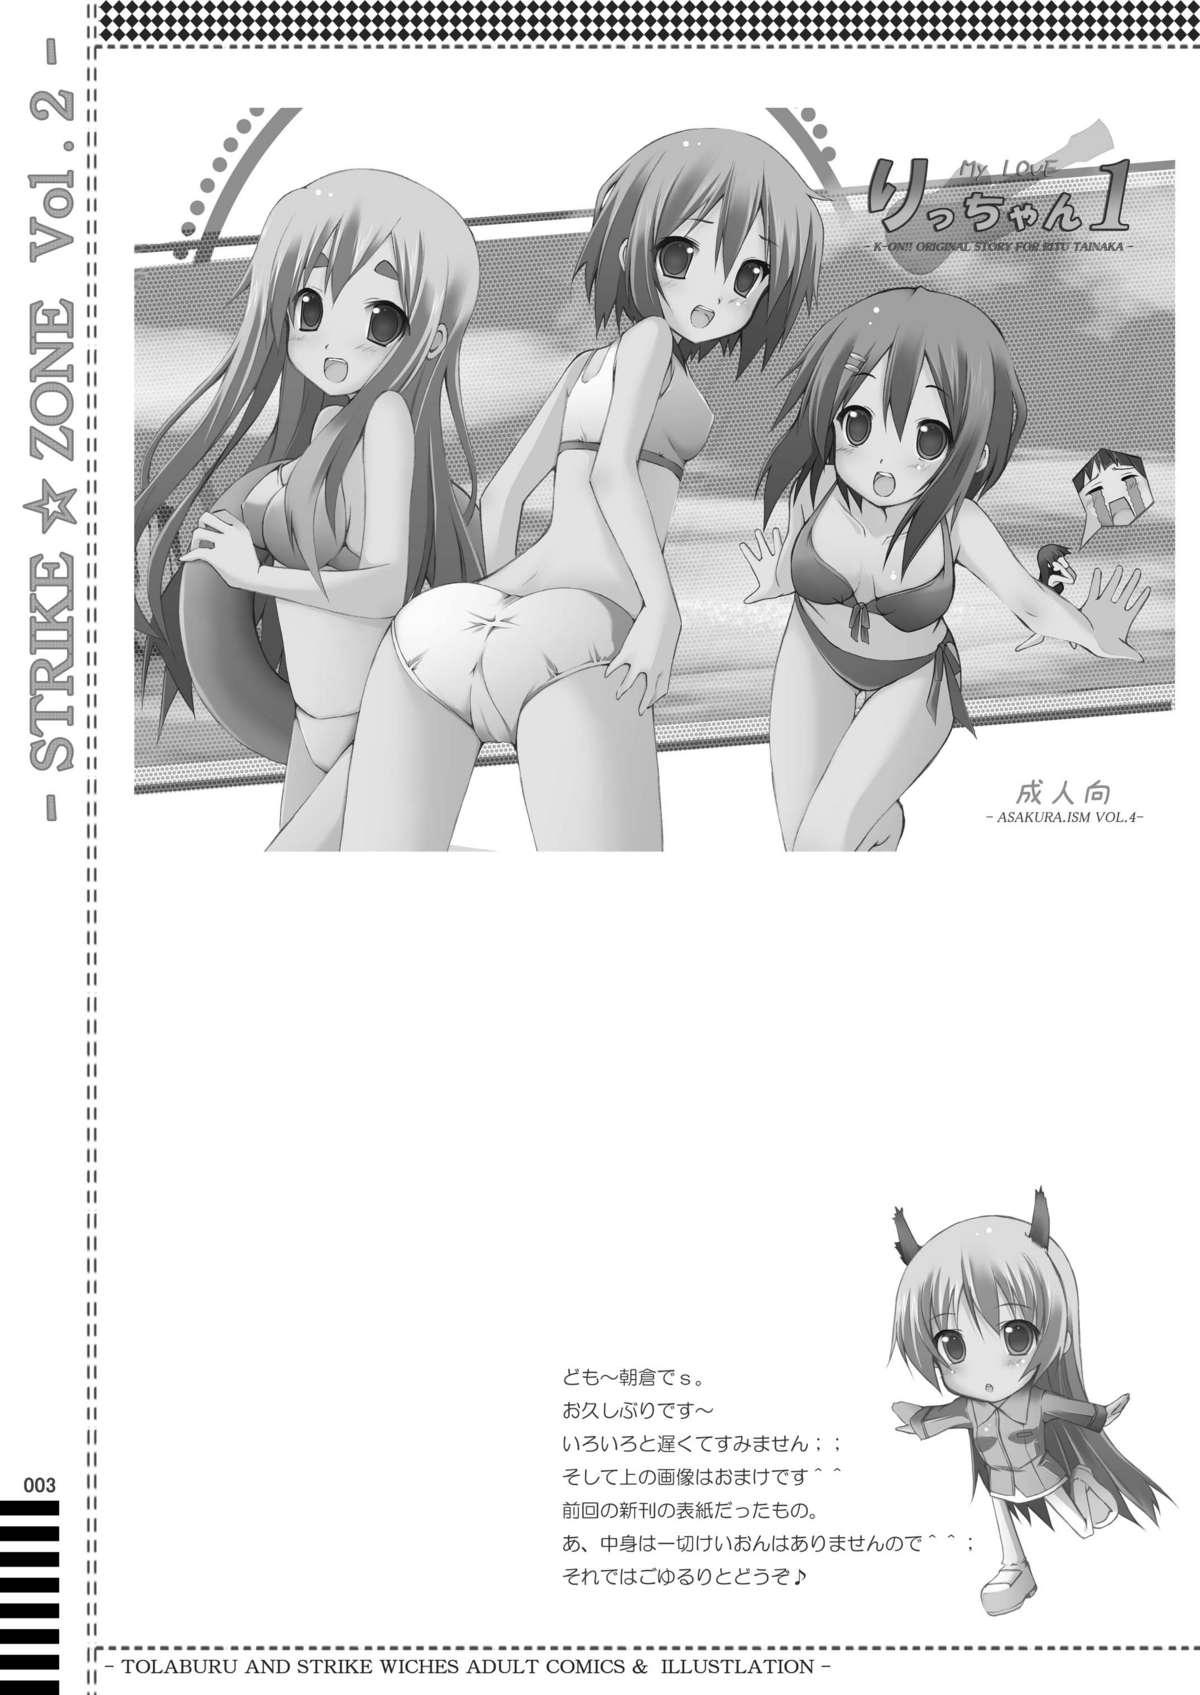 Awesome STRIKE☆ZONE 2 - Strike witches Fake - Page 2